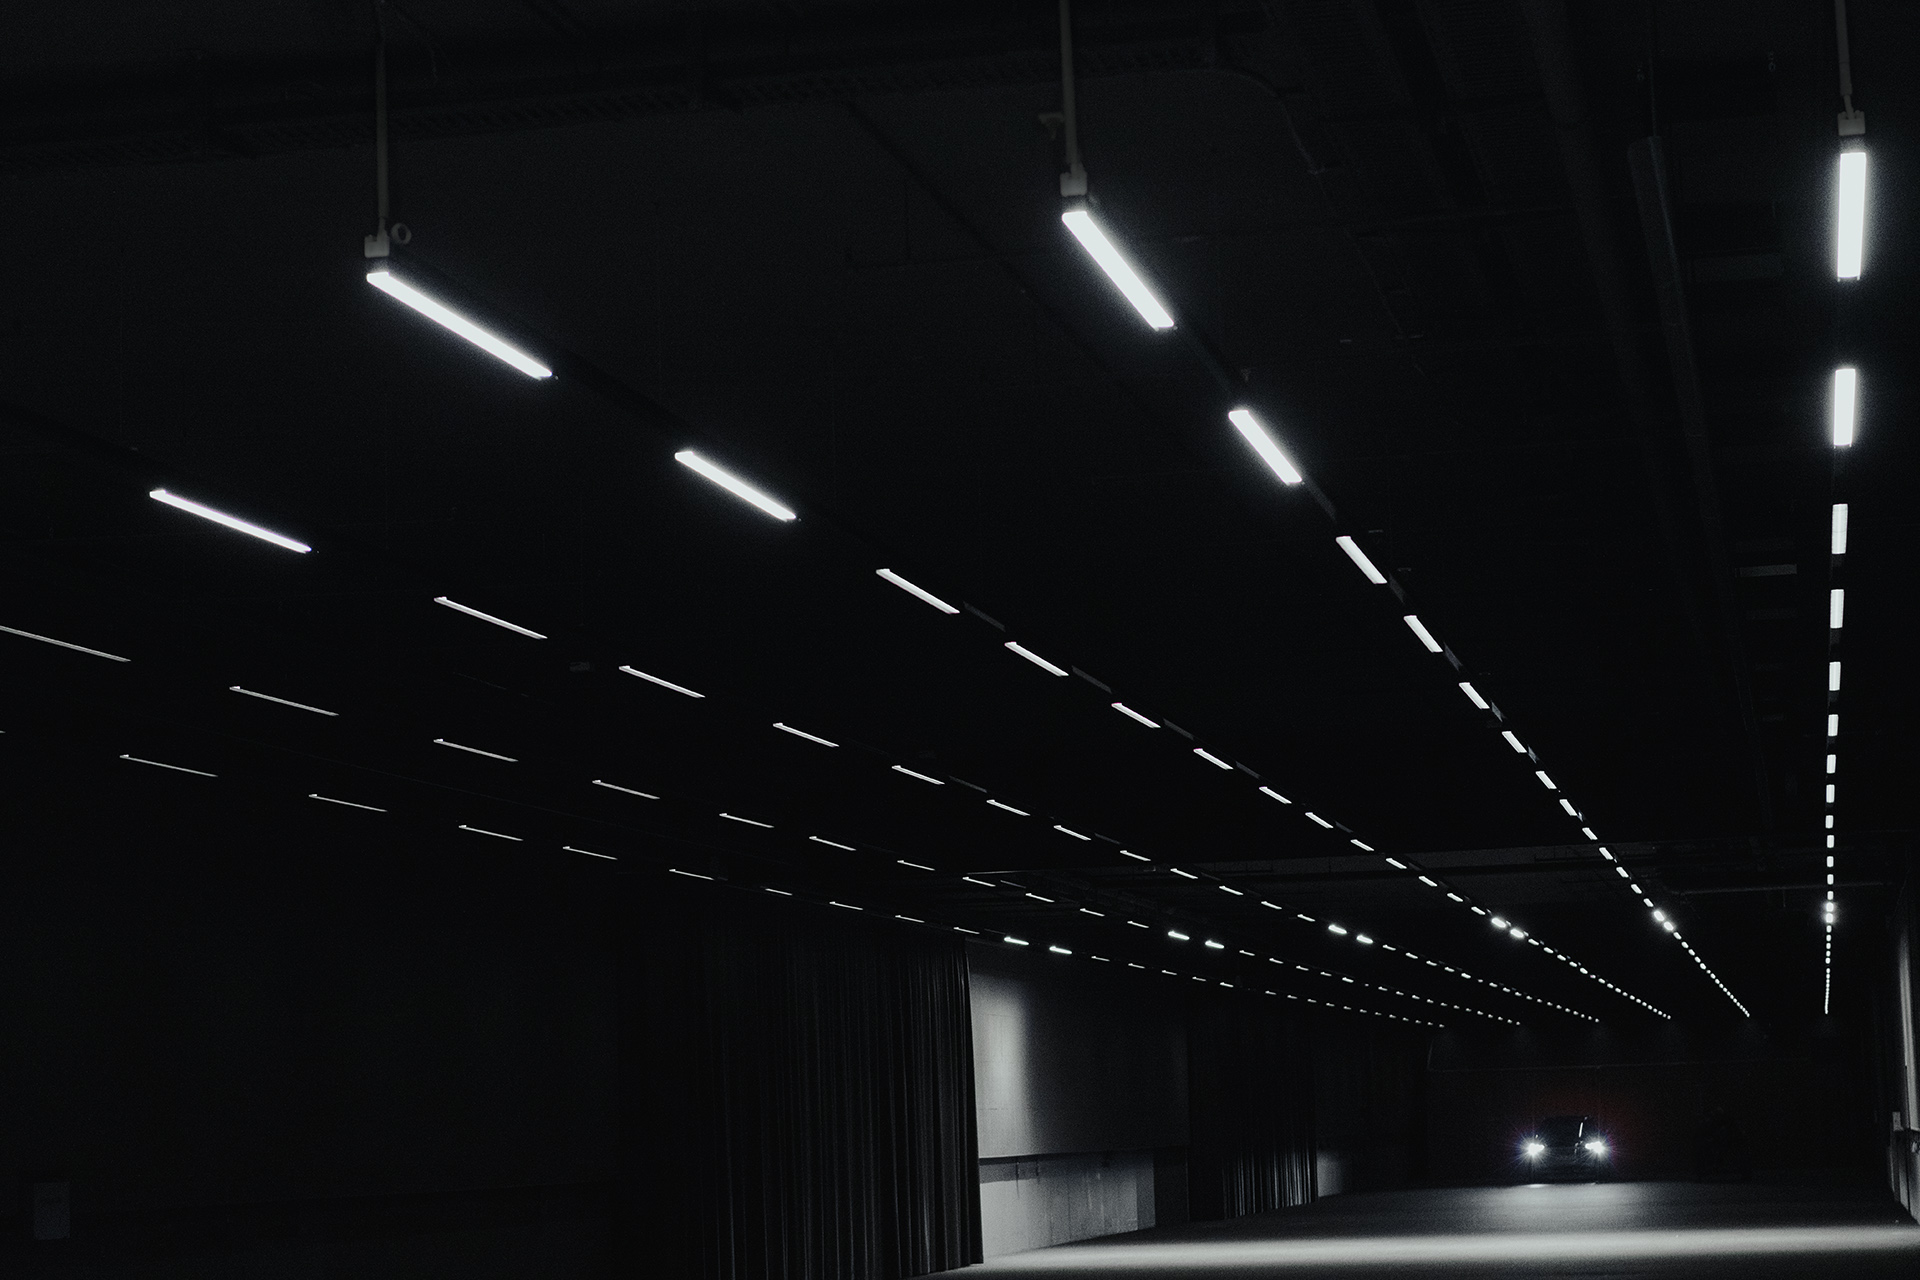 Glimpse of the Audi “light tunnel”.